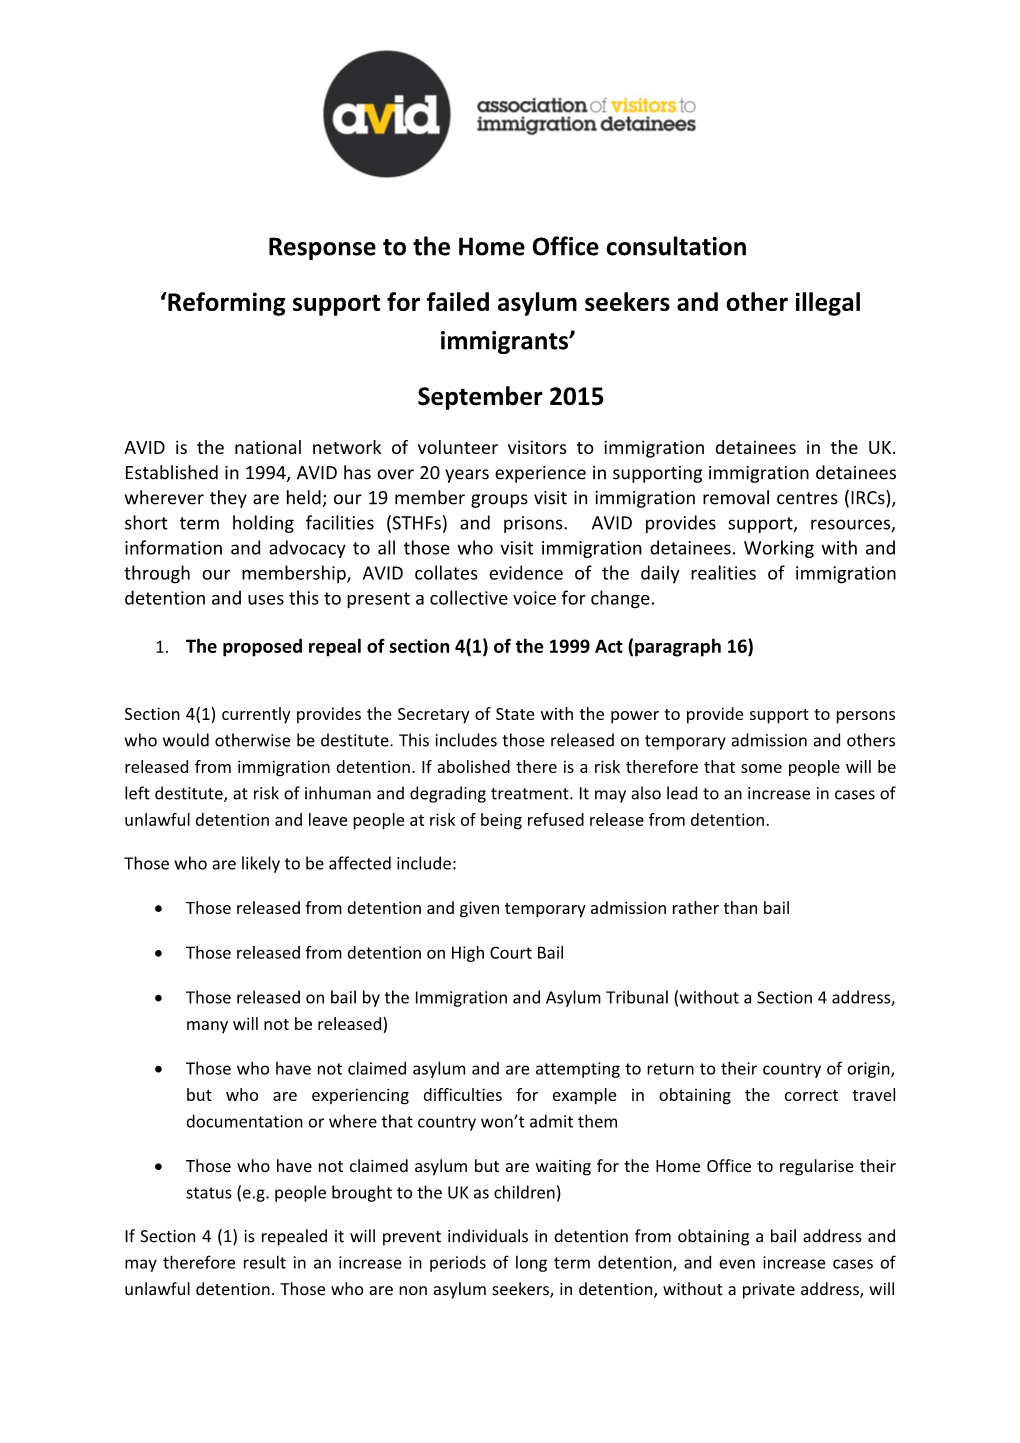 Response to the Home Office Consultation